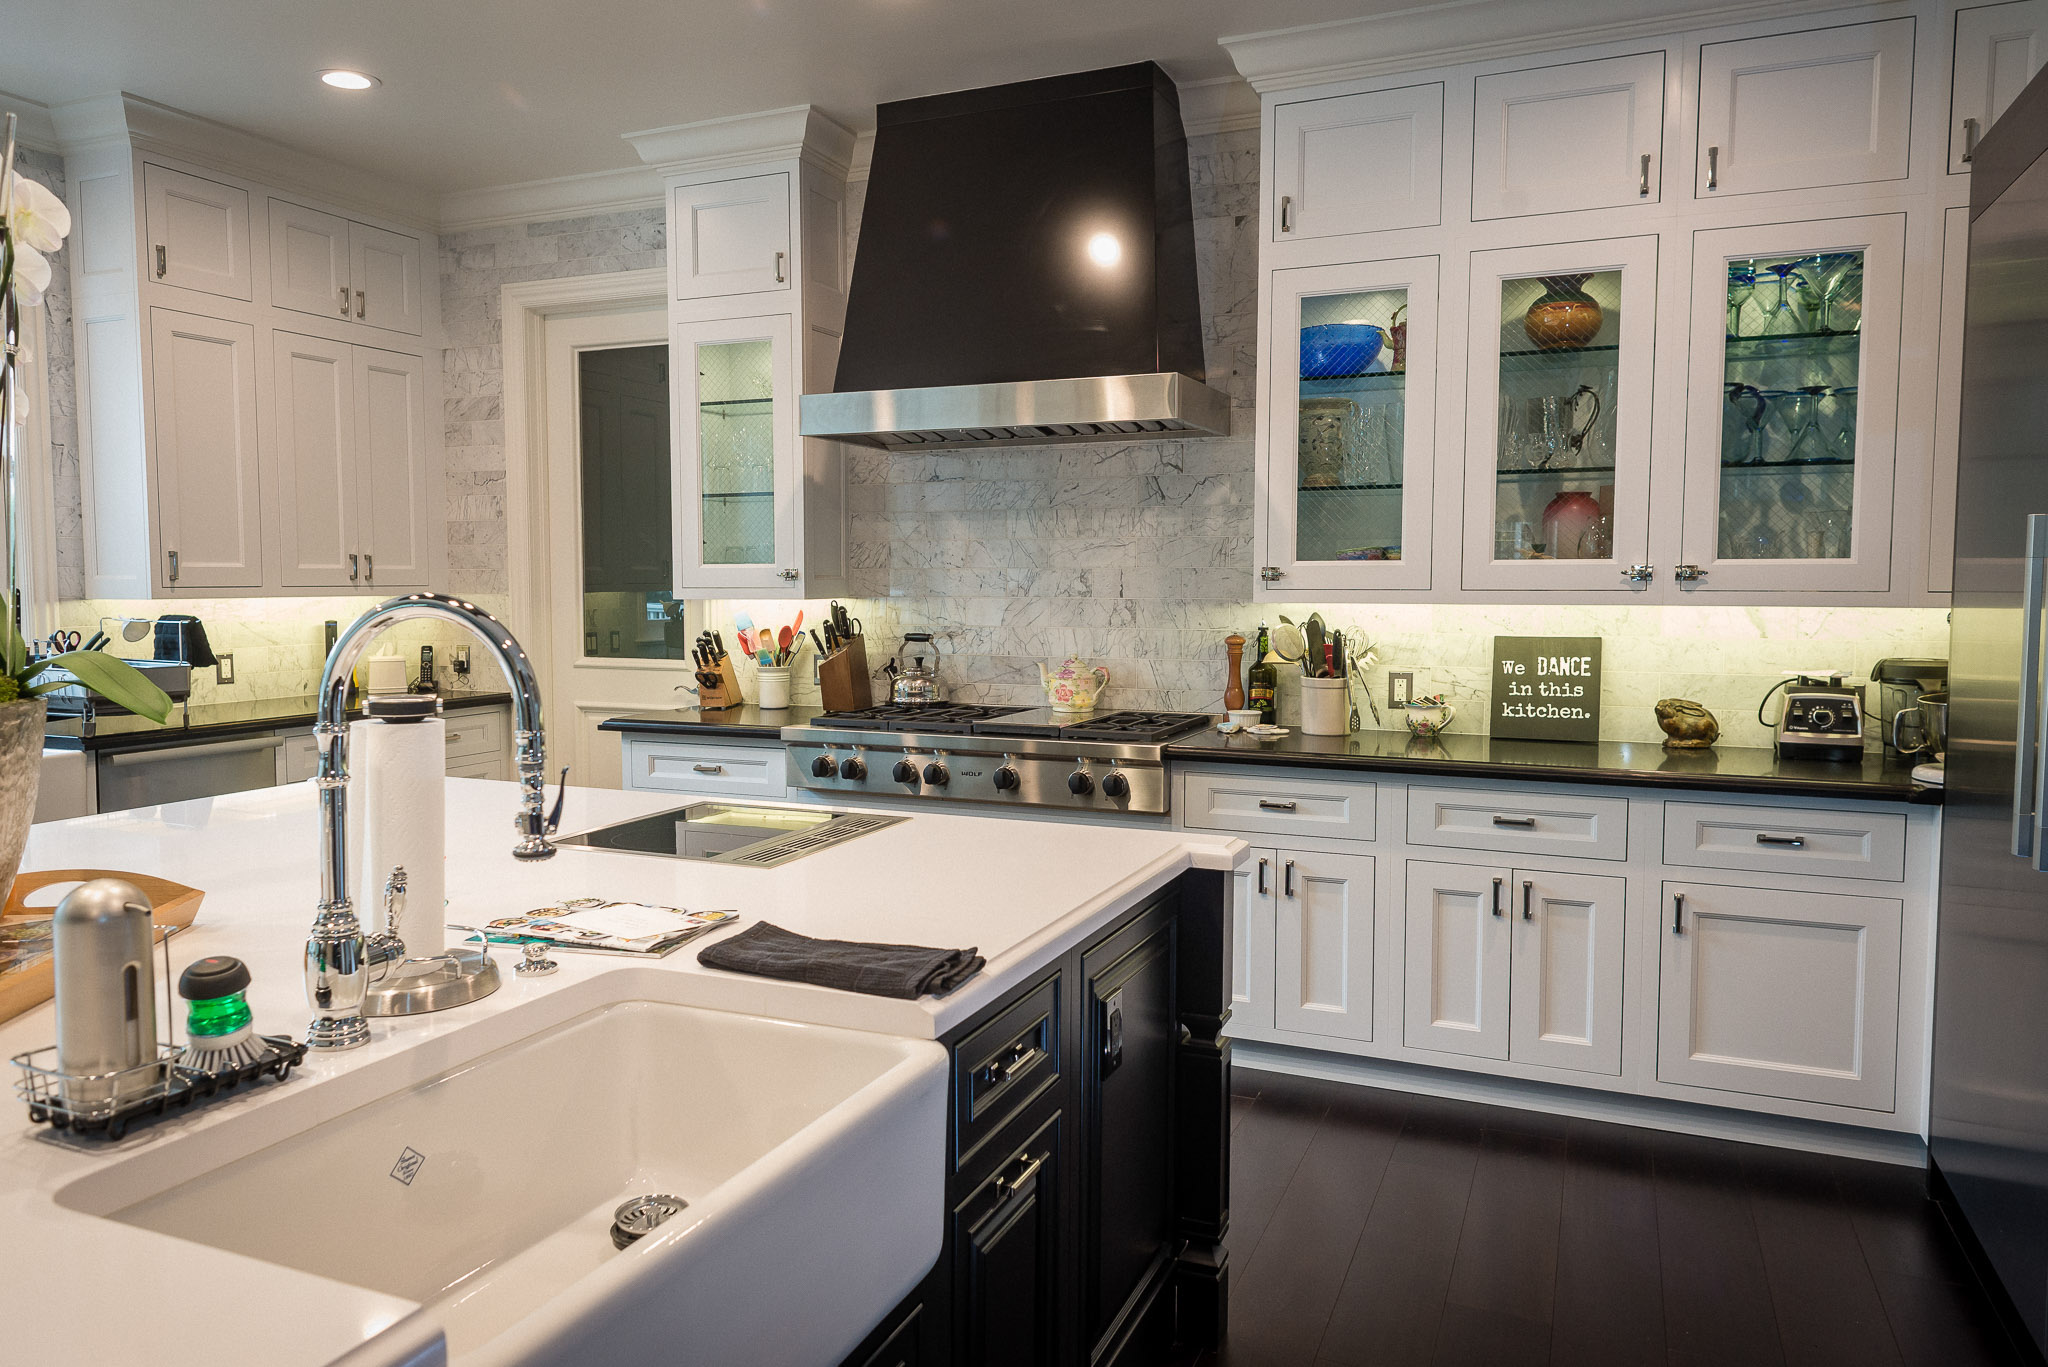 Modern kitchen with white cabinets and marble backsplash.